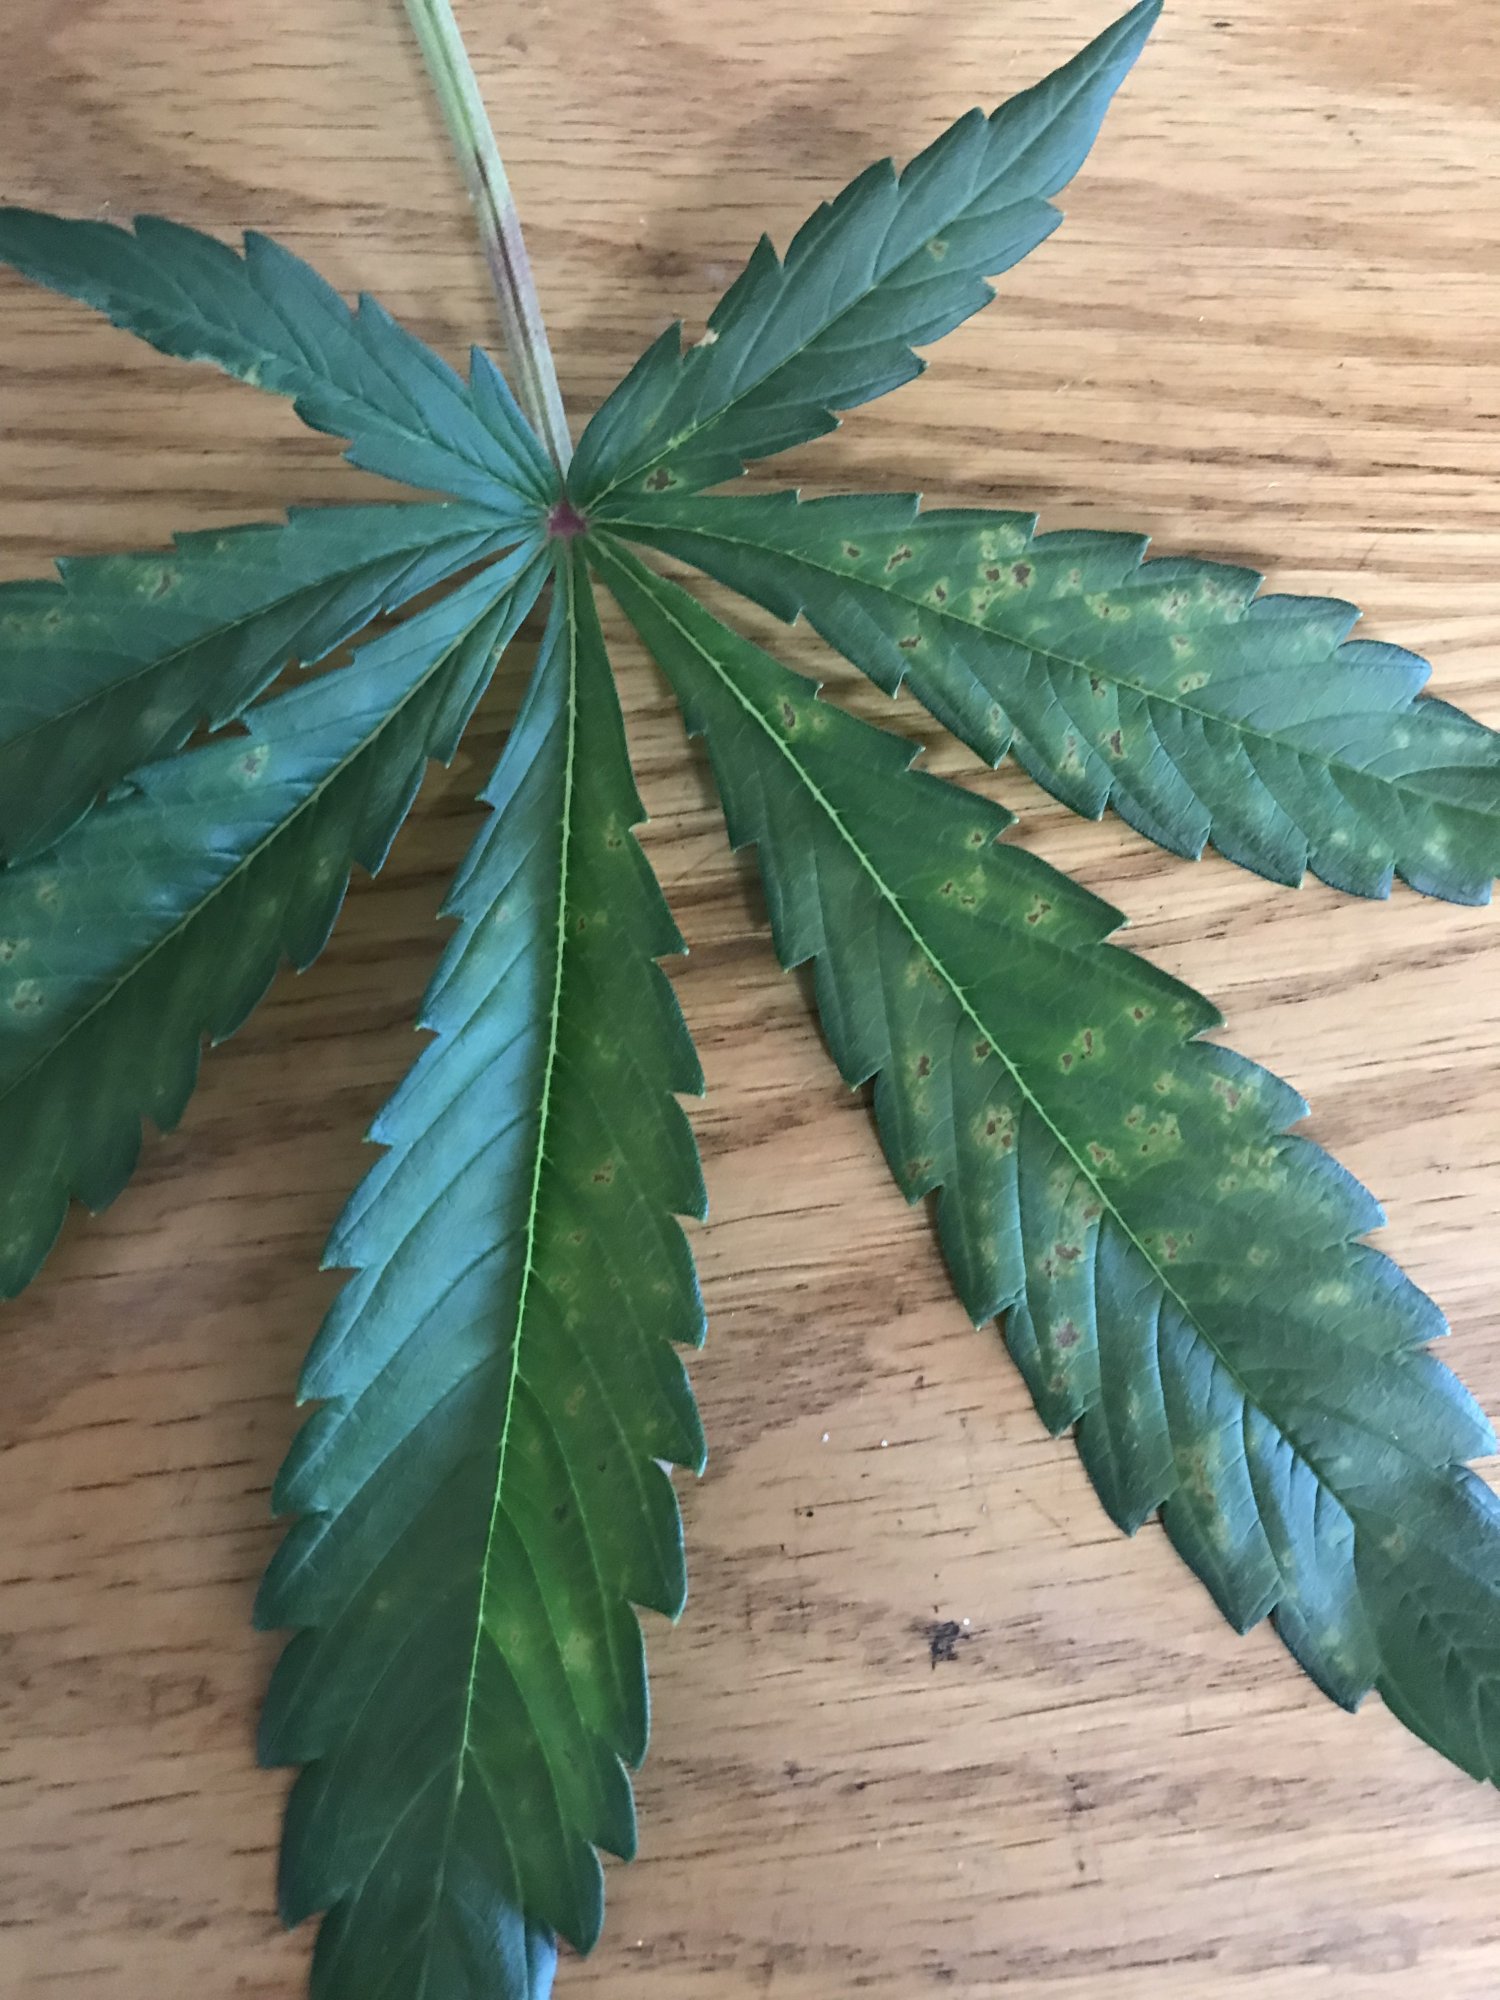 Leaf issue with one of my plants 2